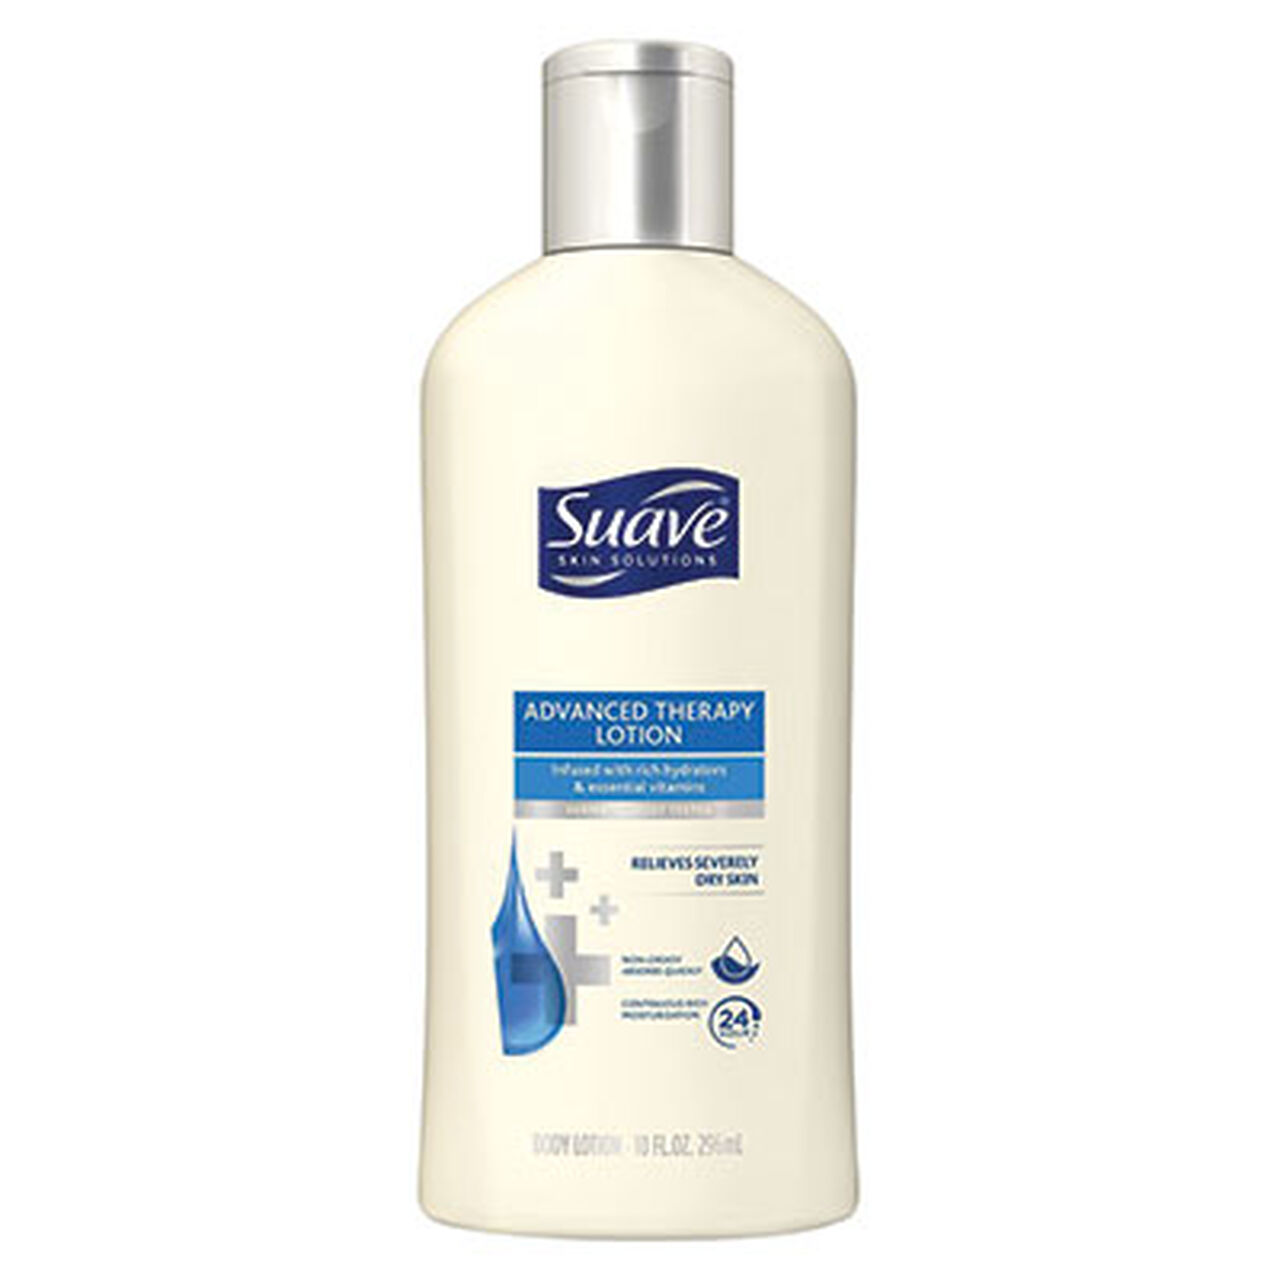 Suave Skin Solutions Advanced Therapy Lotion image number 0